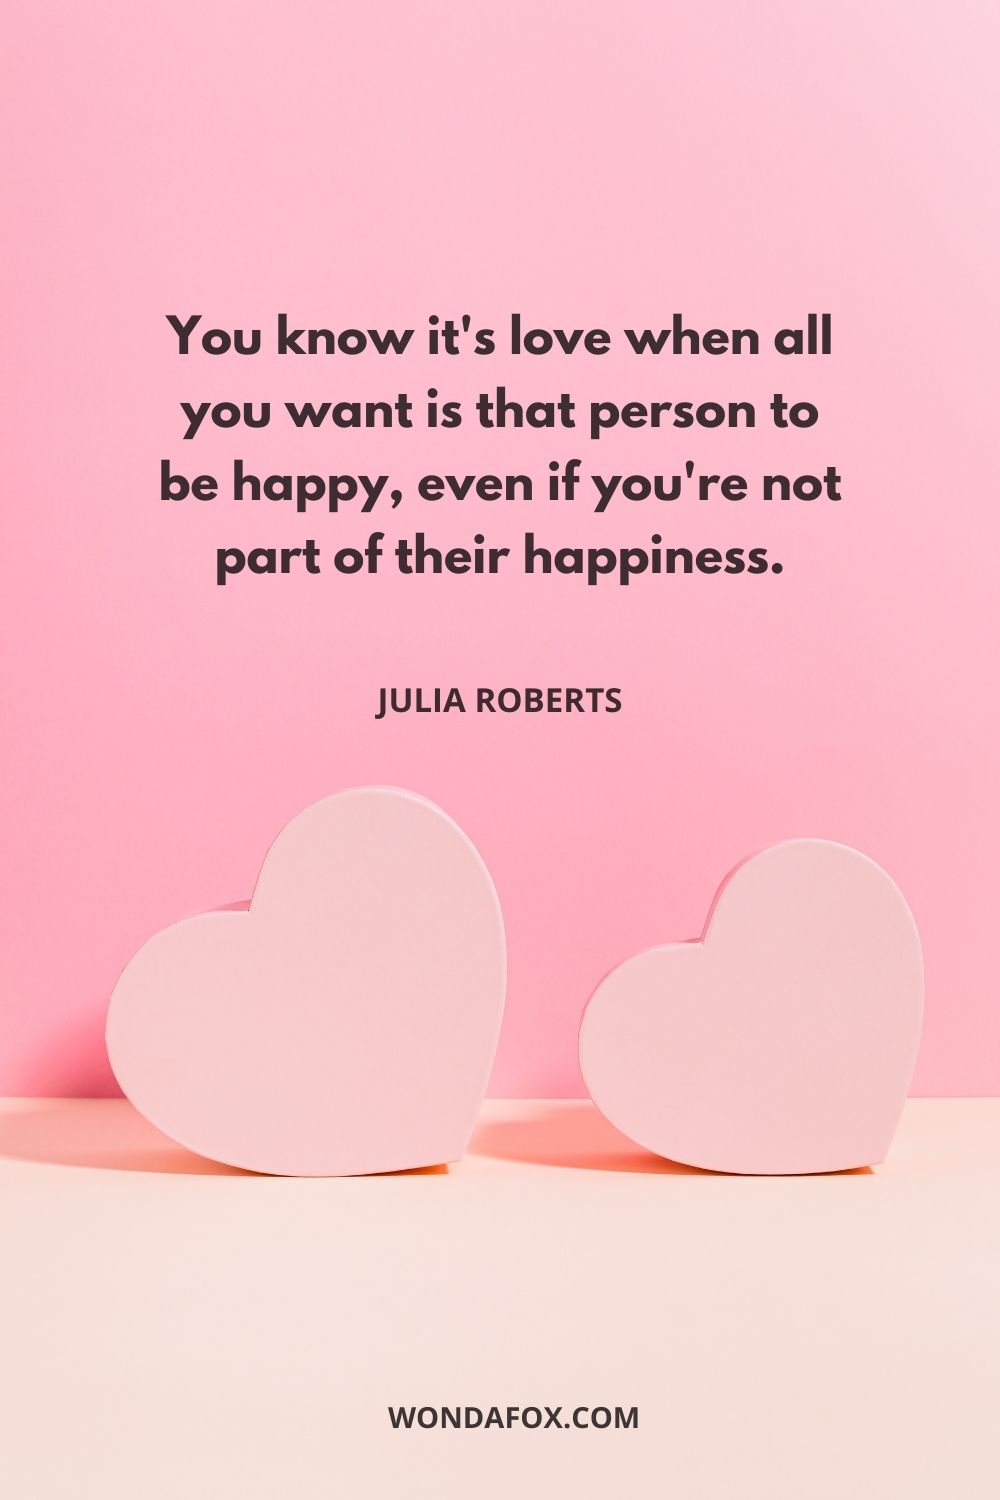 You know it's love when all you want is that person to be happy, even if you're not part of their happiness.